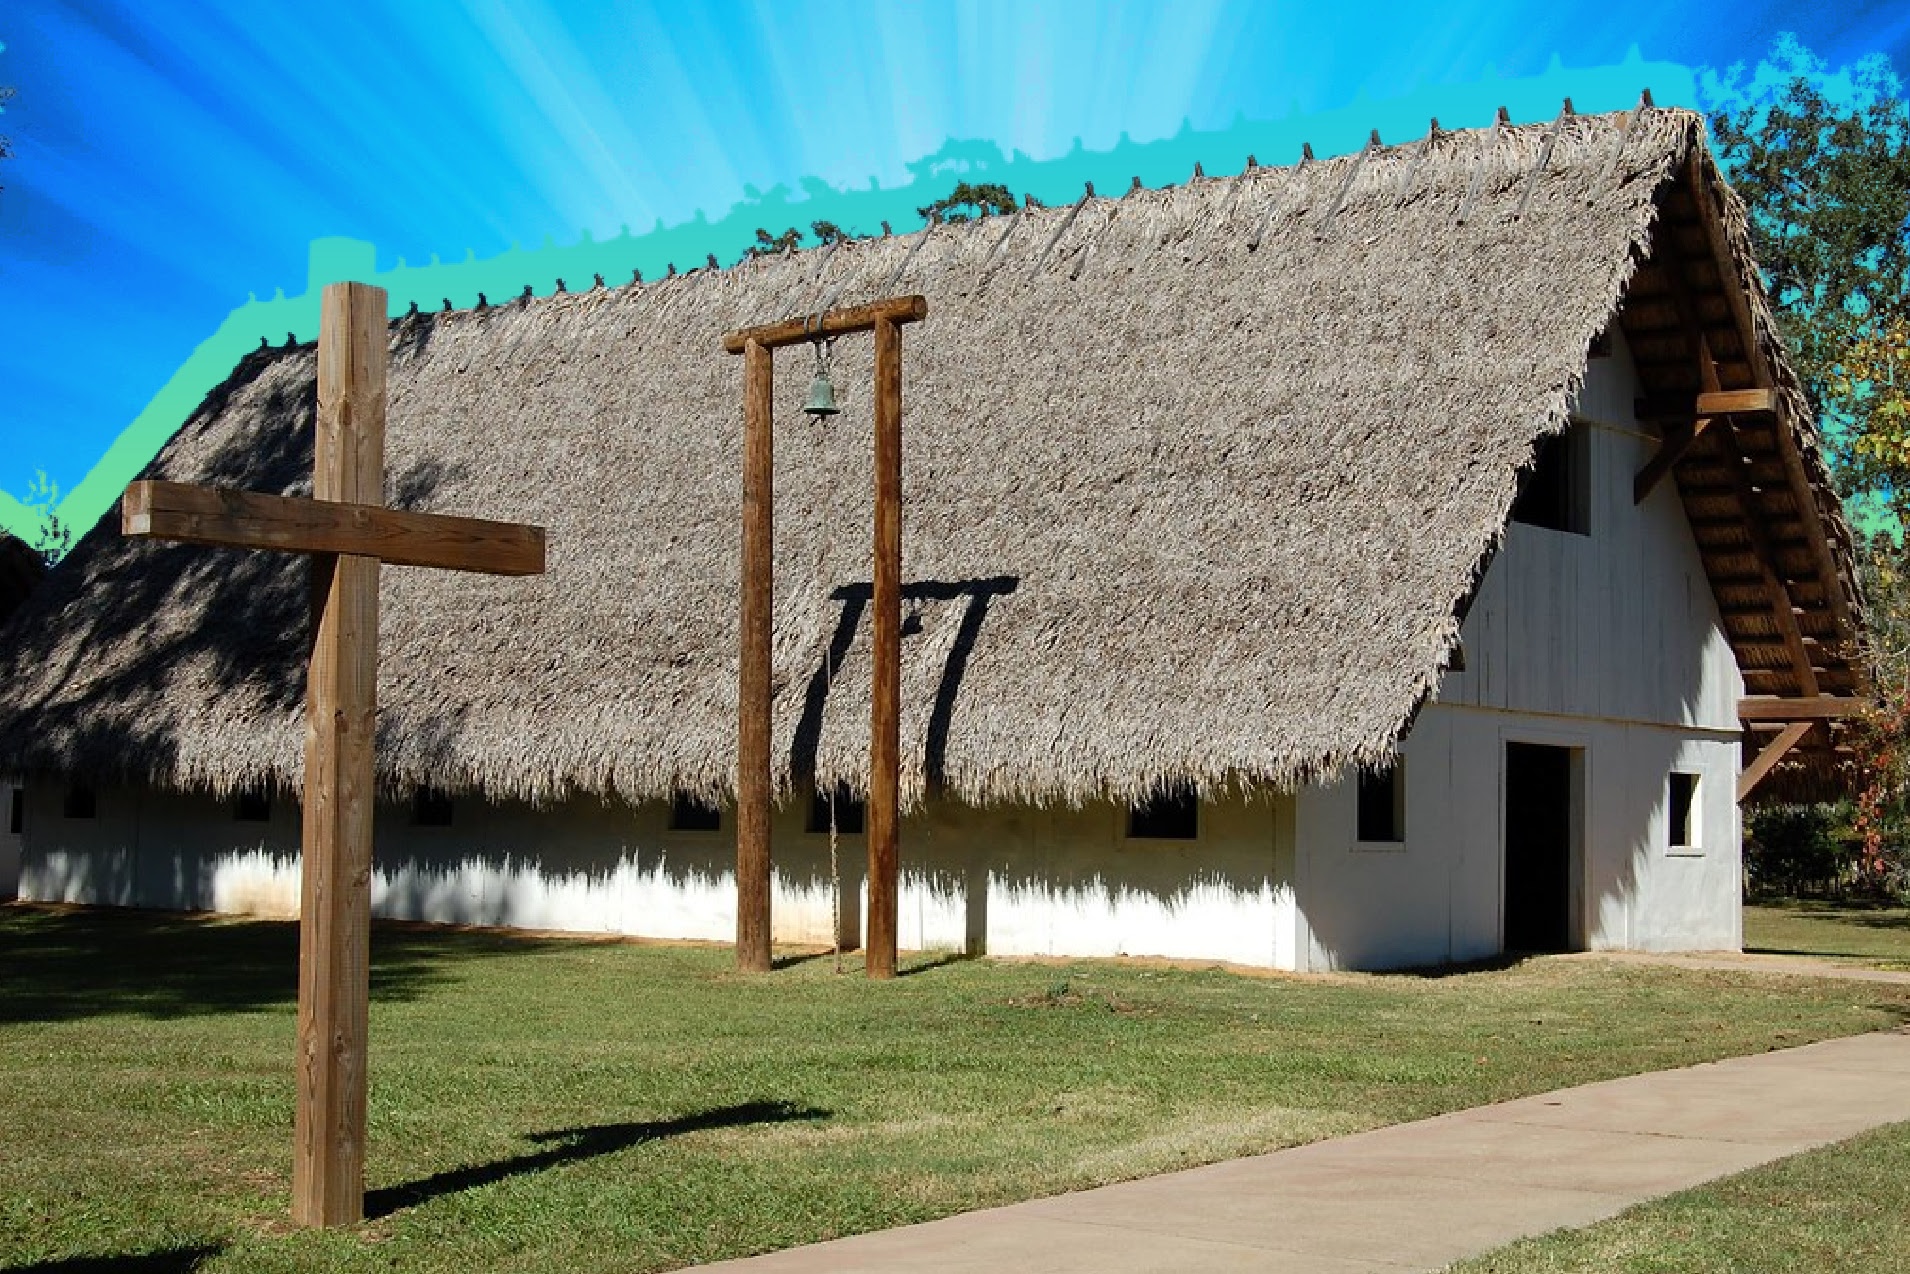 This Apalachee Mission is the Only Mission Whose Location is Known to Date